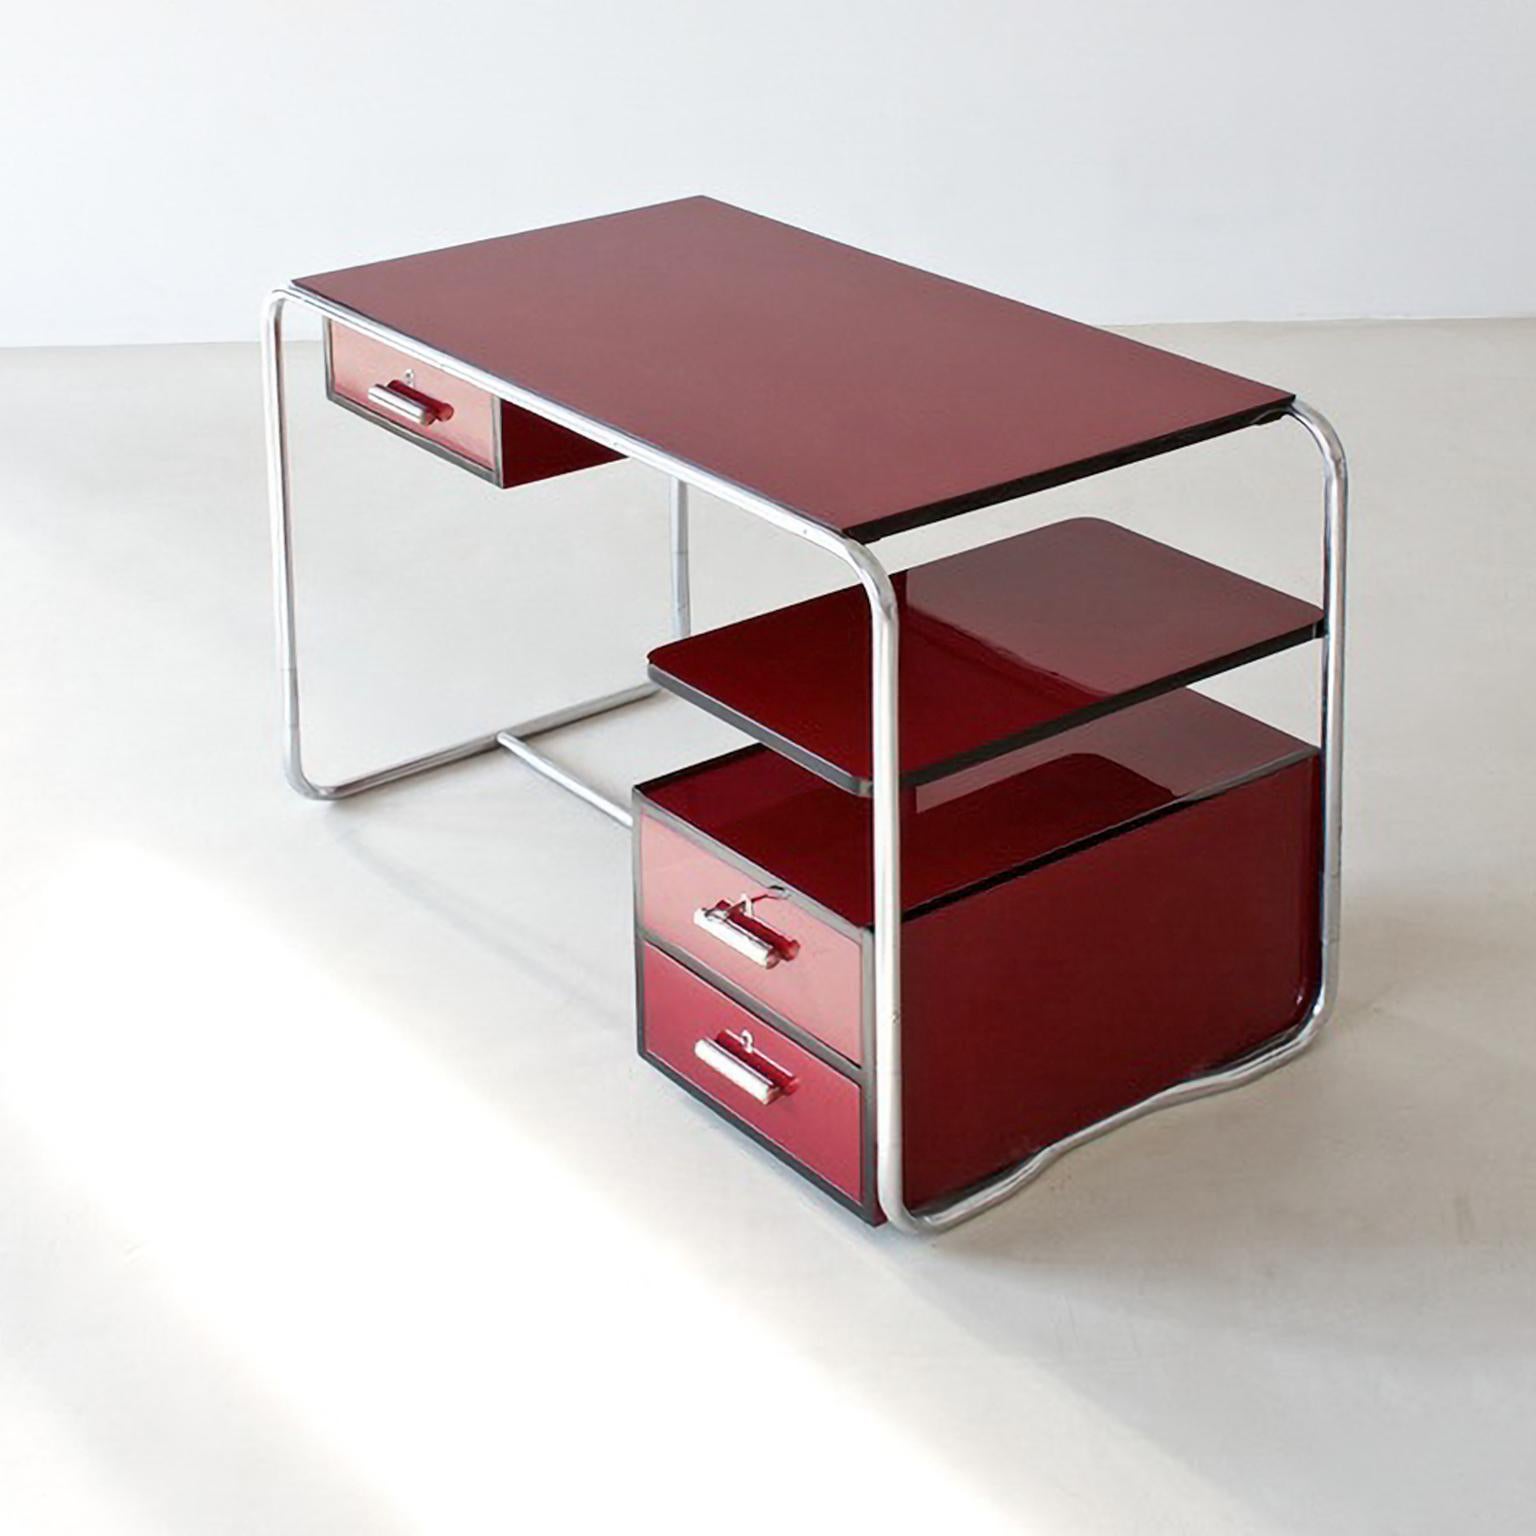 Modernist Tubular Steel Desk, Glossy Lacquered Wood, Plated Metal, Customizable For Sale 2